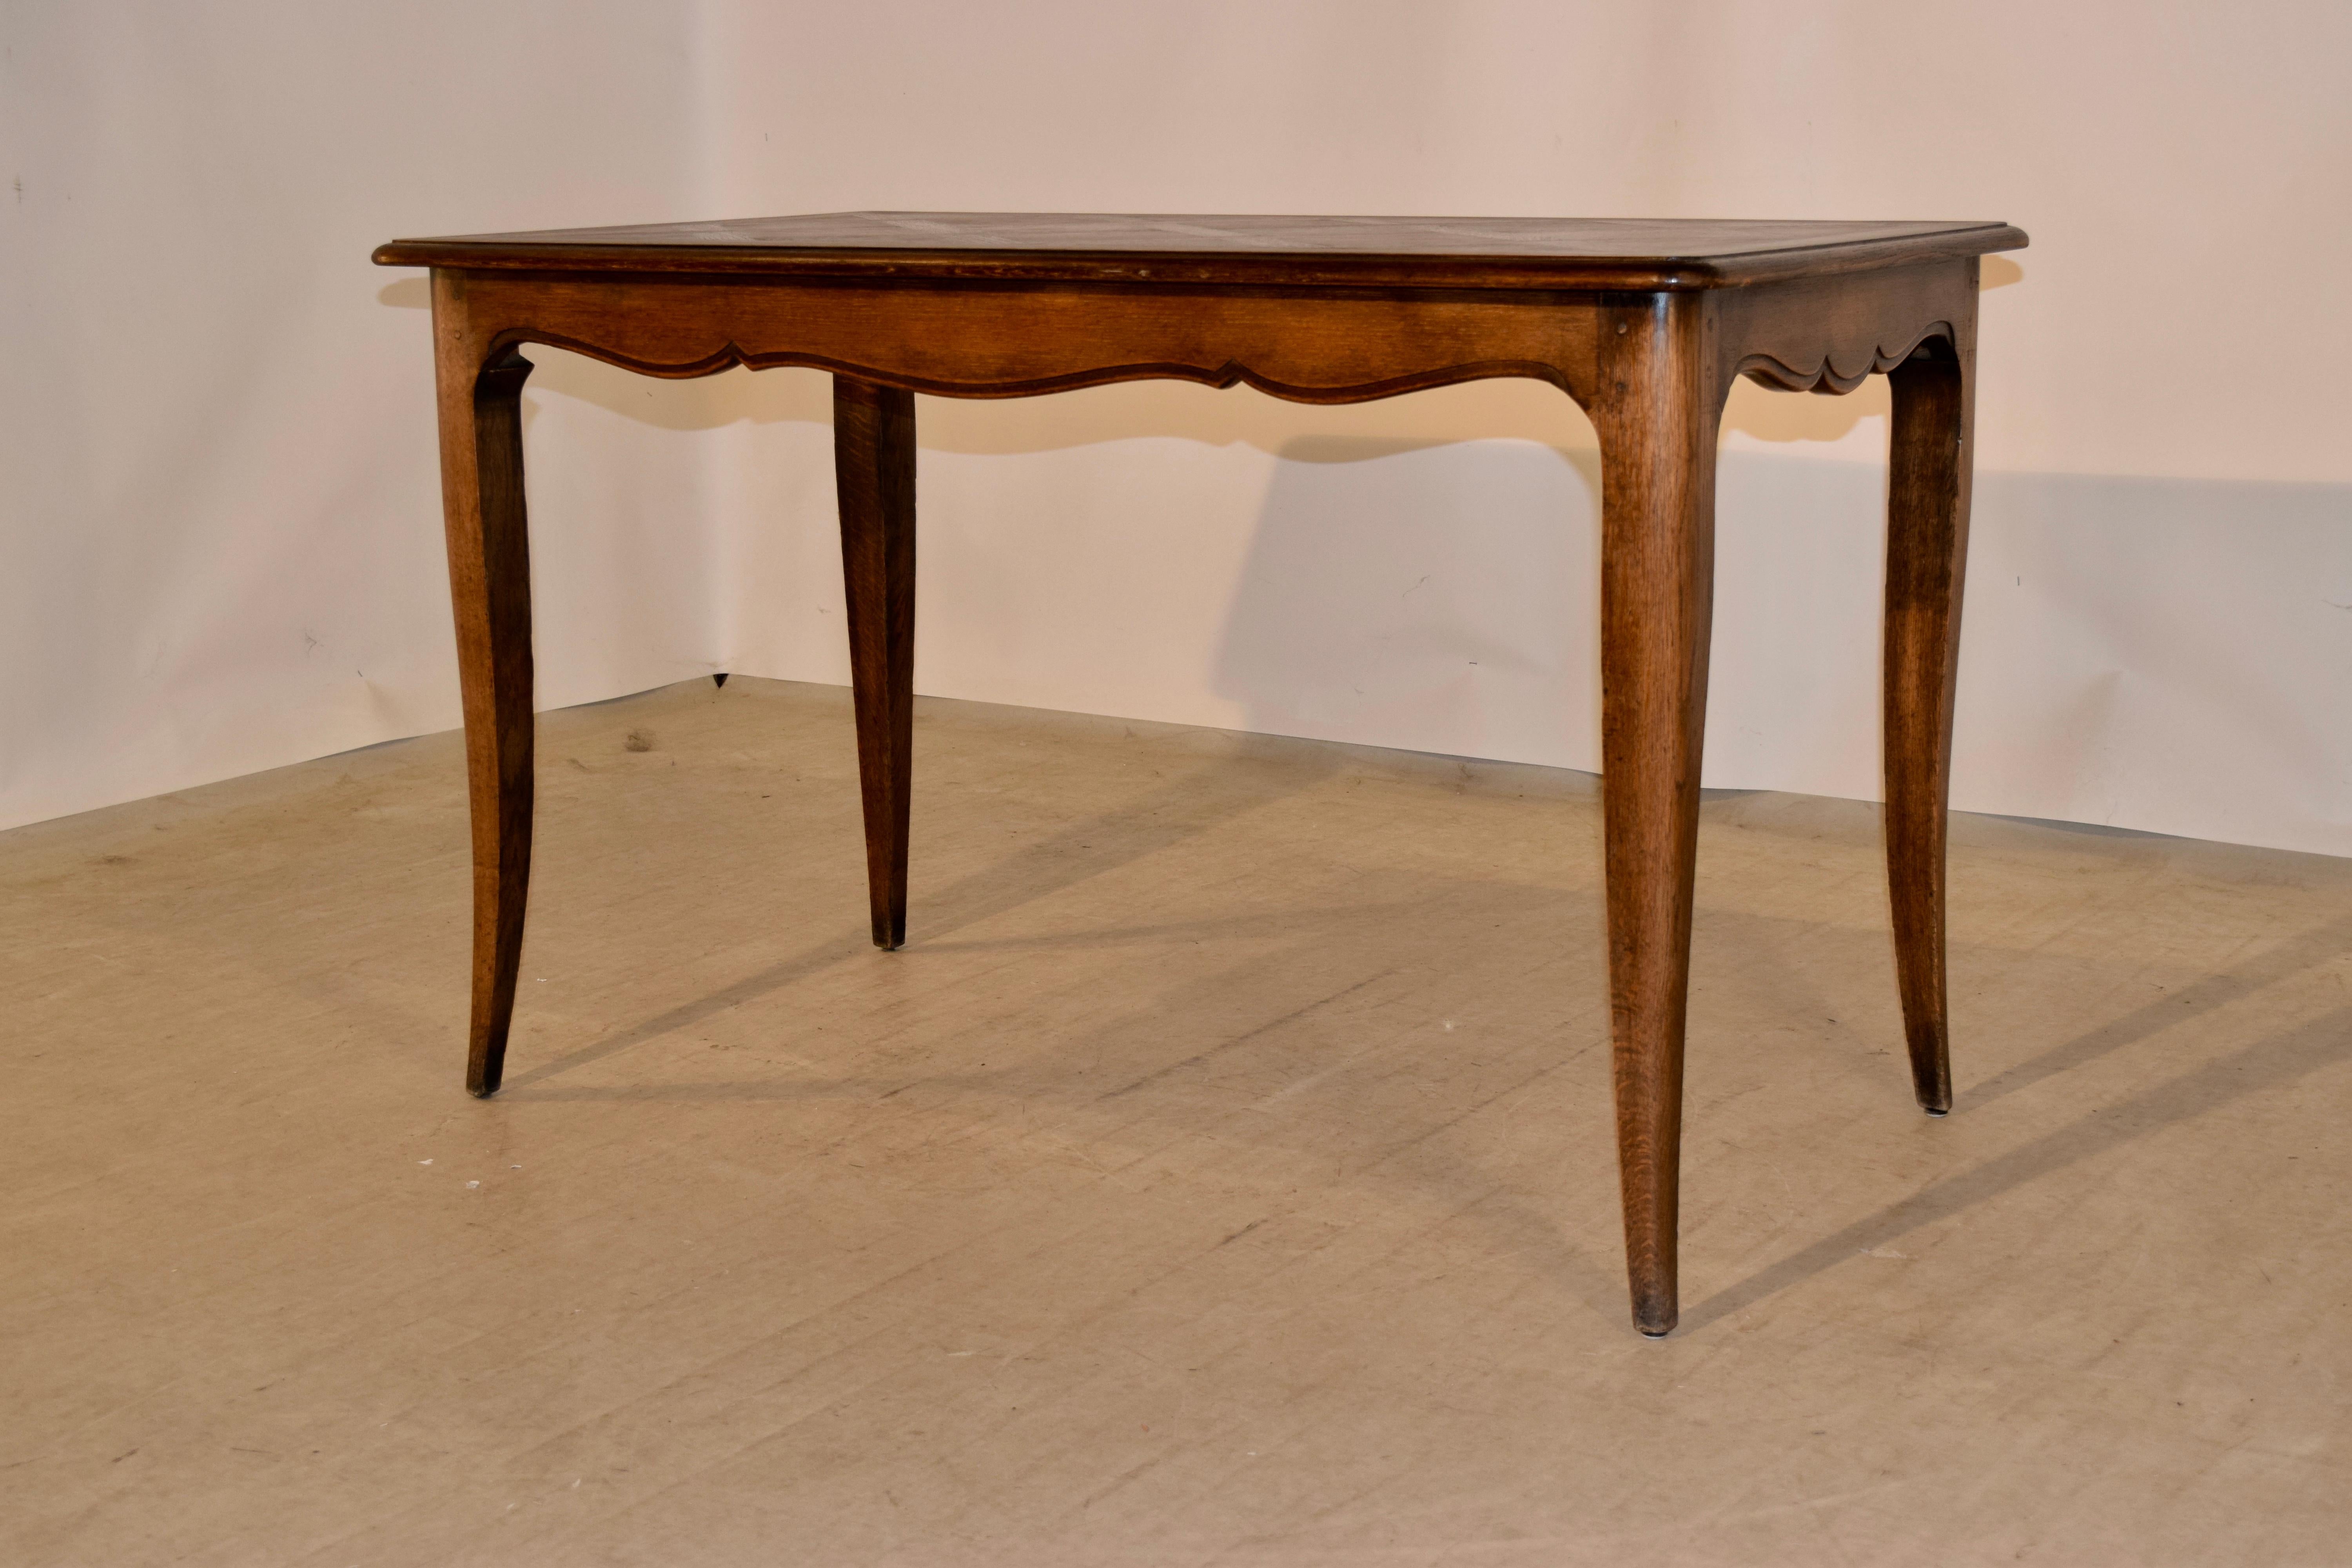 Late 19th Century Table with Parquetry Top (Französisch)